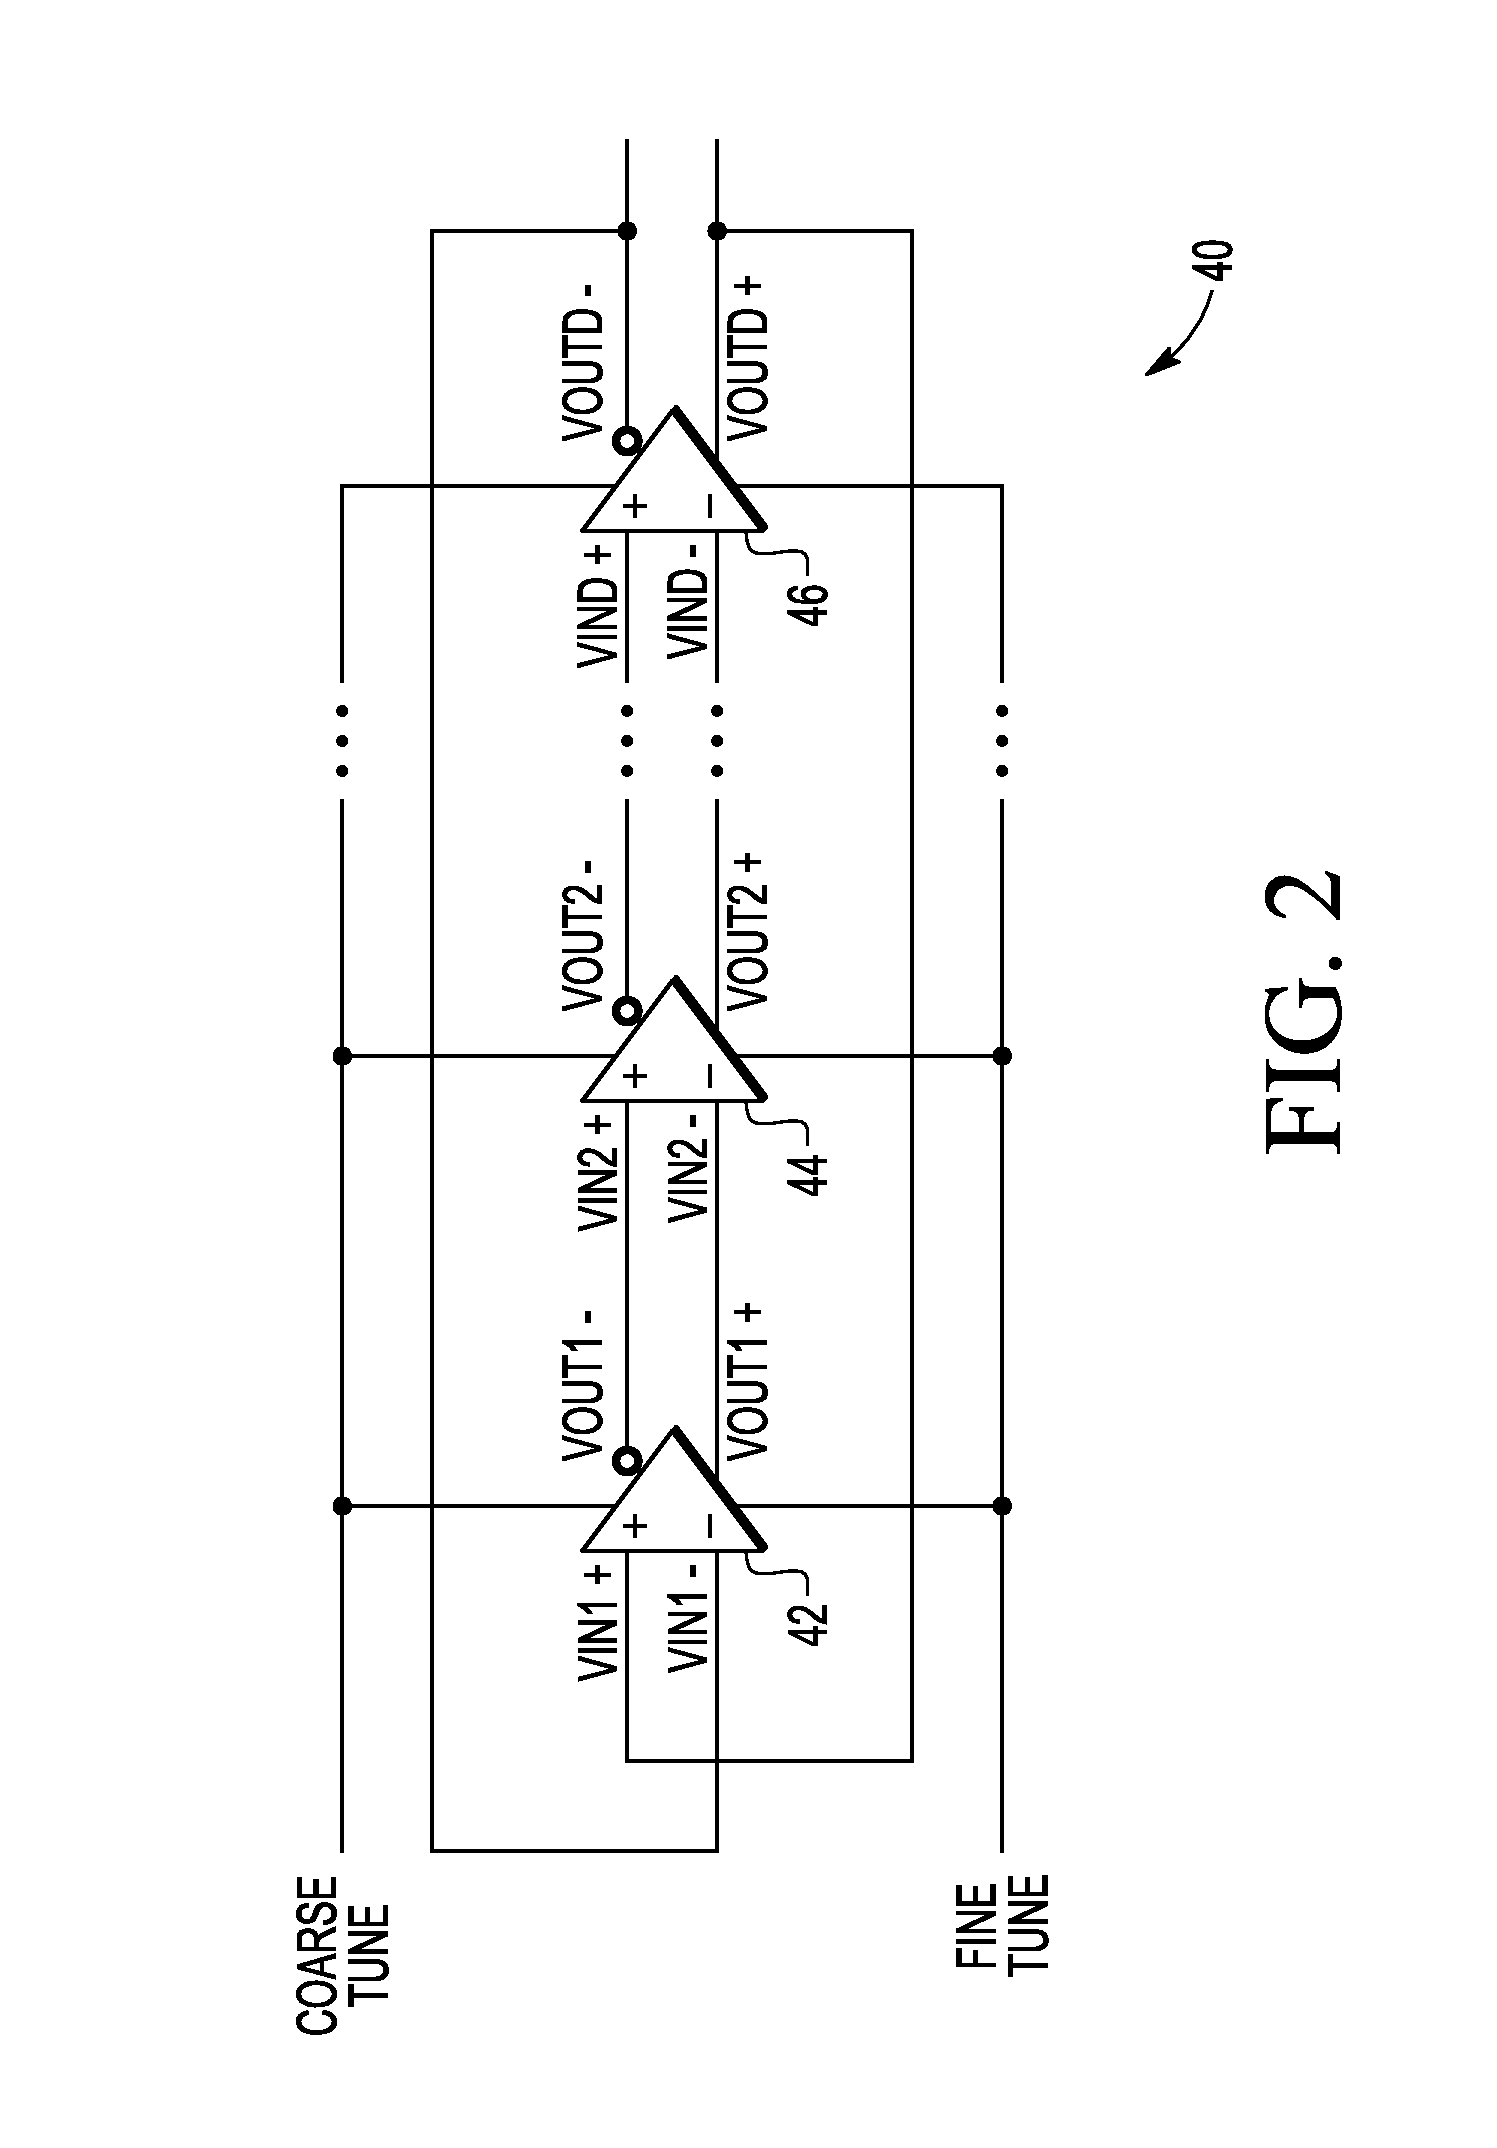 Phase locked loop circuit having a voltage controlled oscillator with improved bandwidth